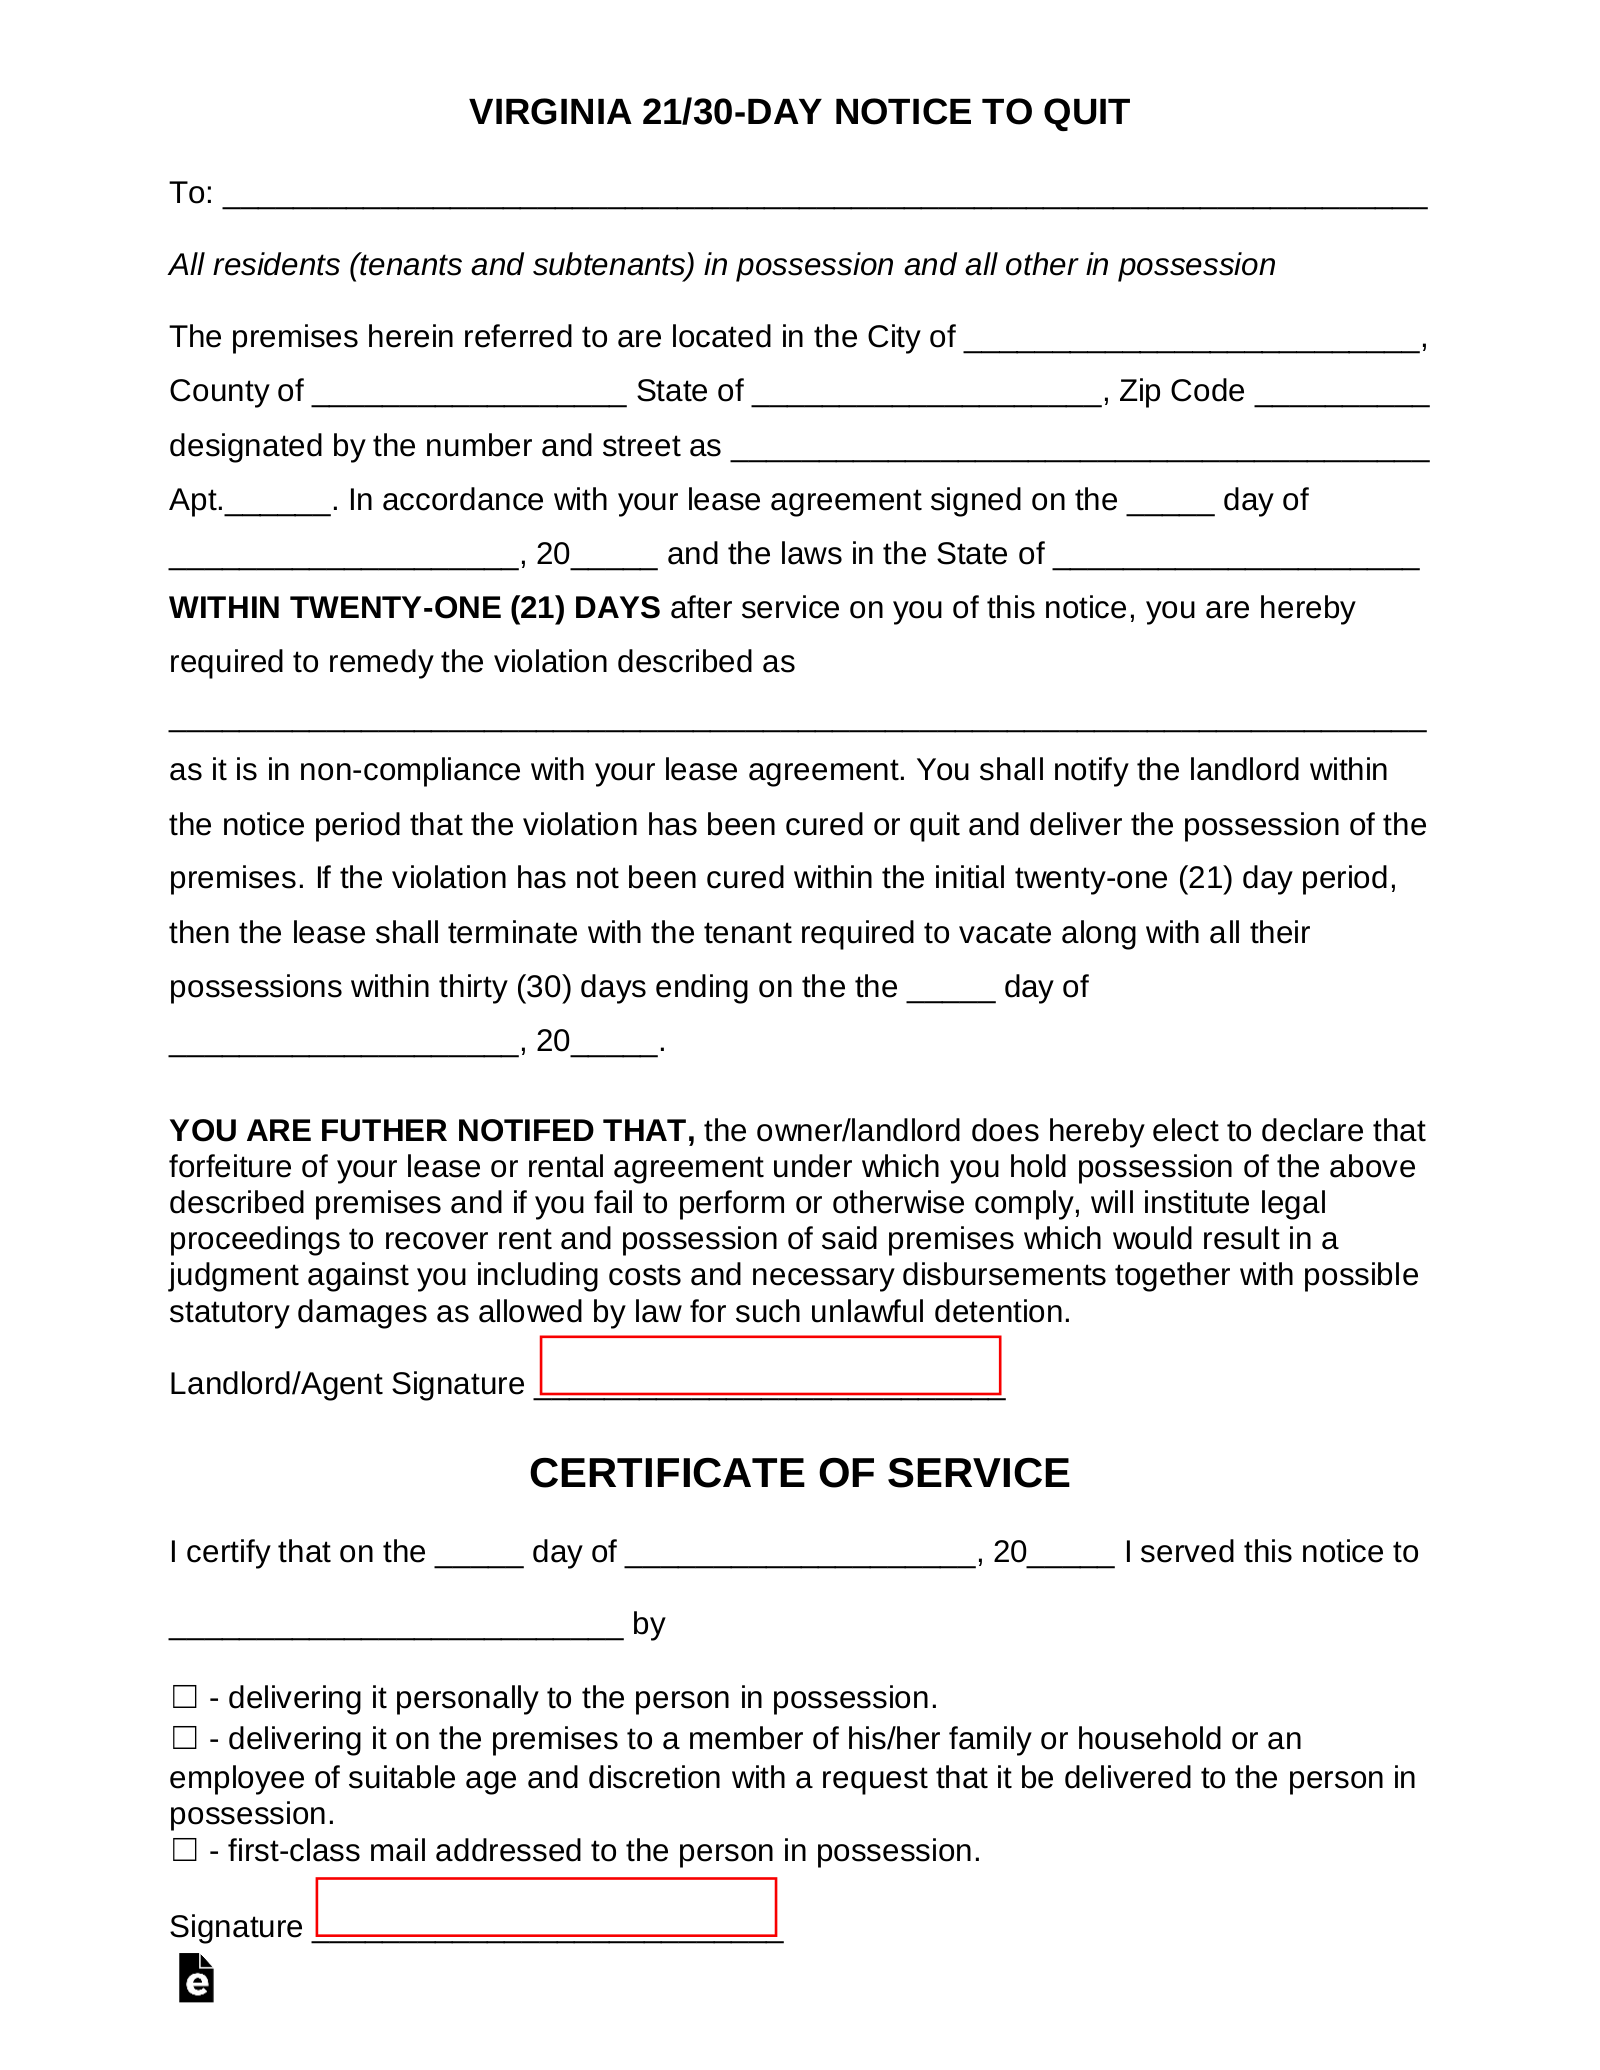 Virginia 21/30 Day Notice to Quit Form | Non-Compliance